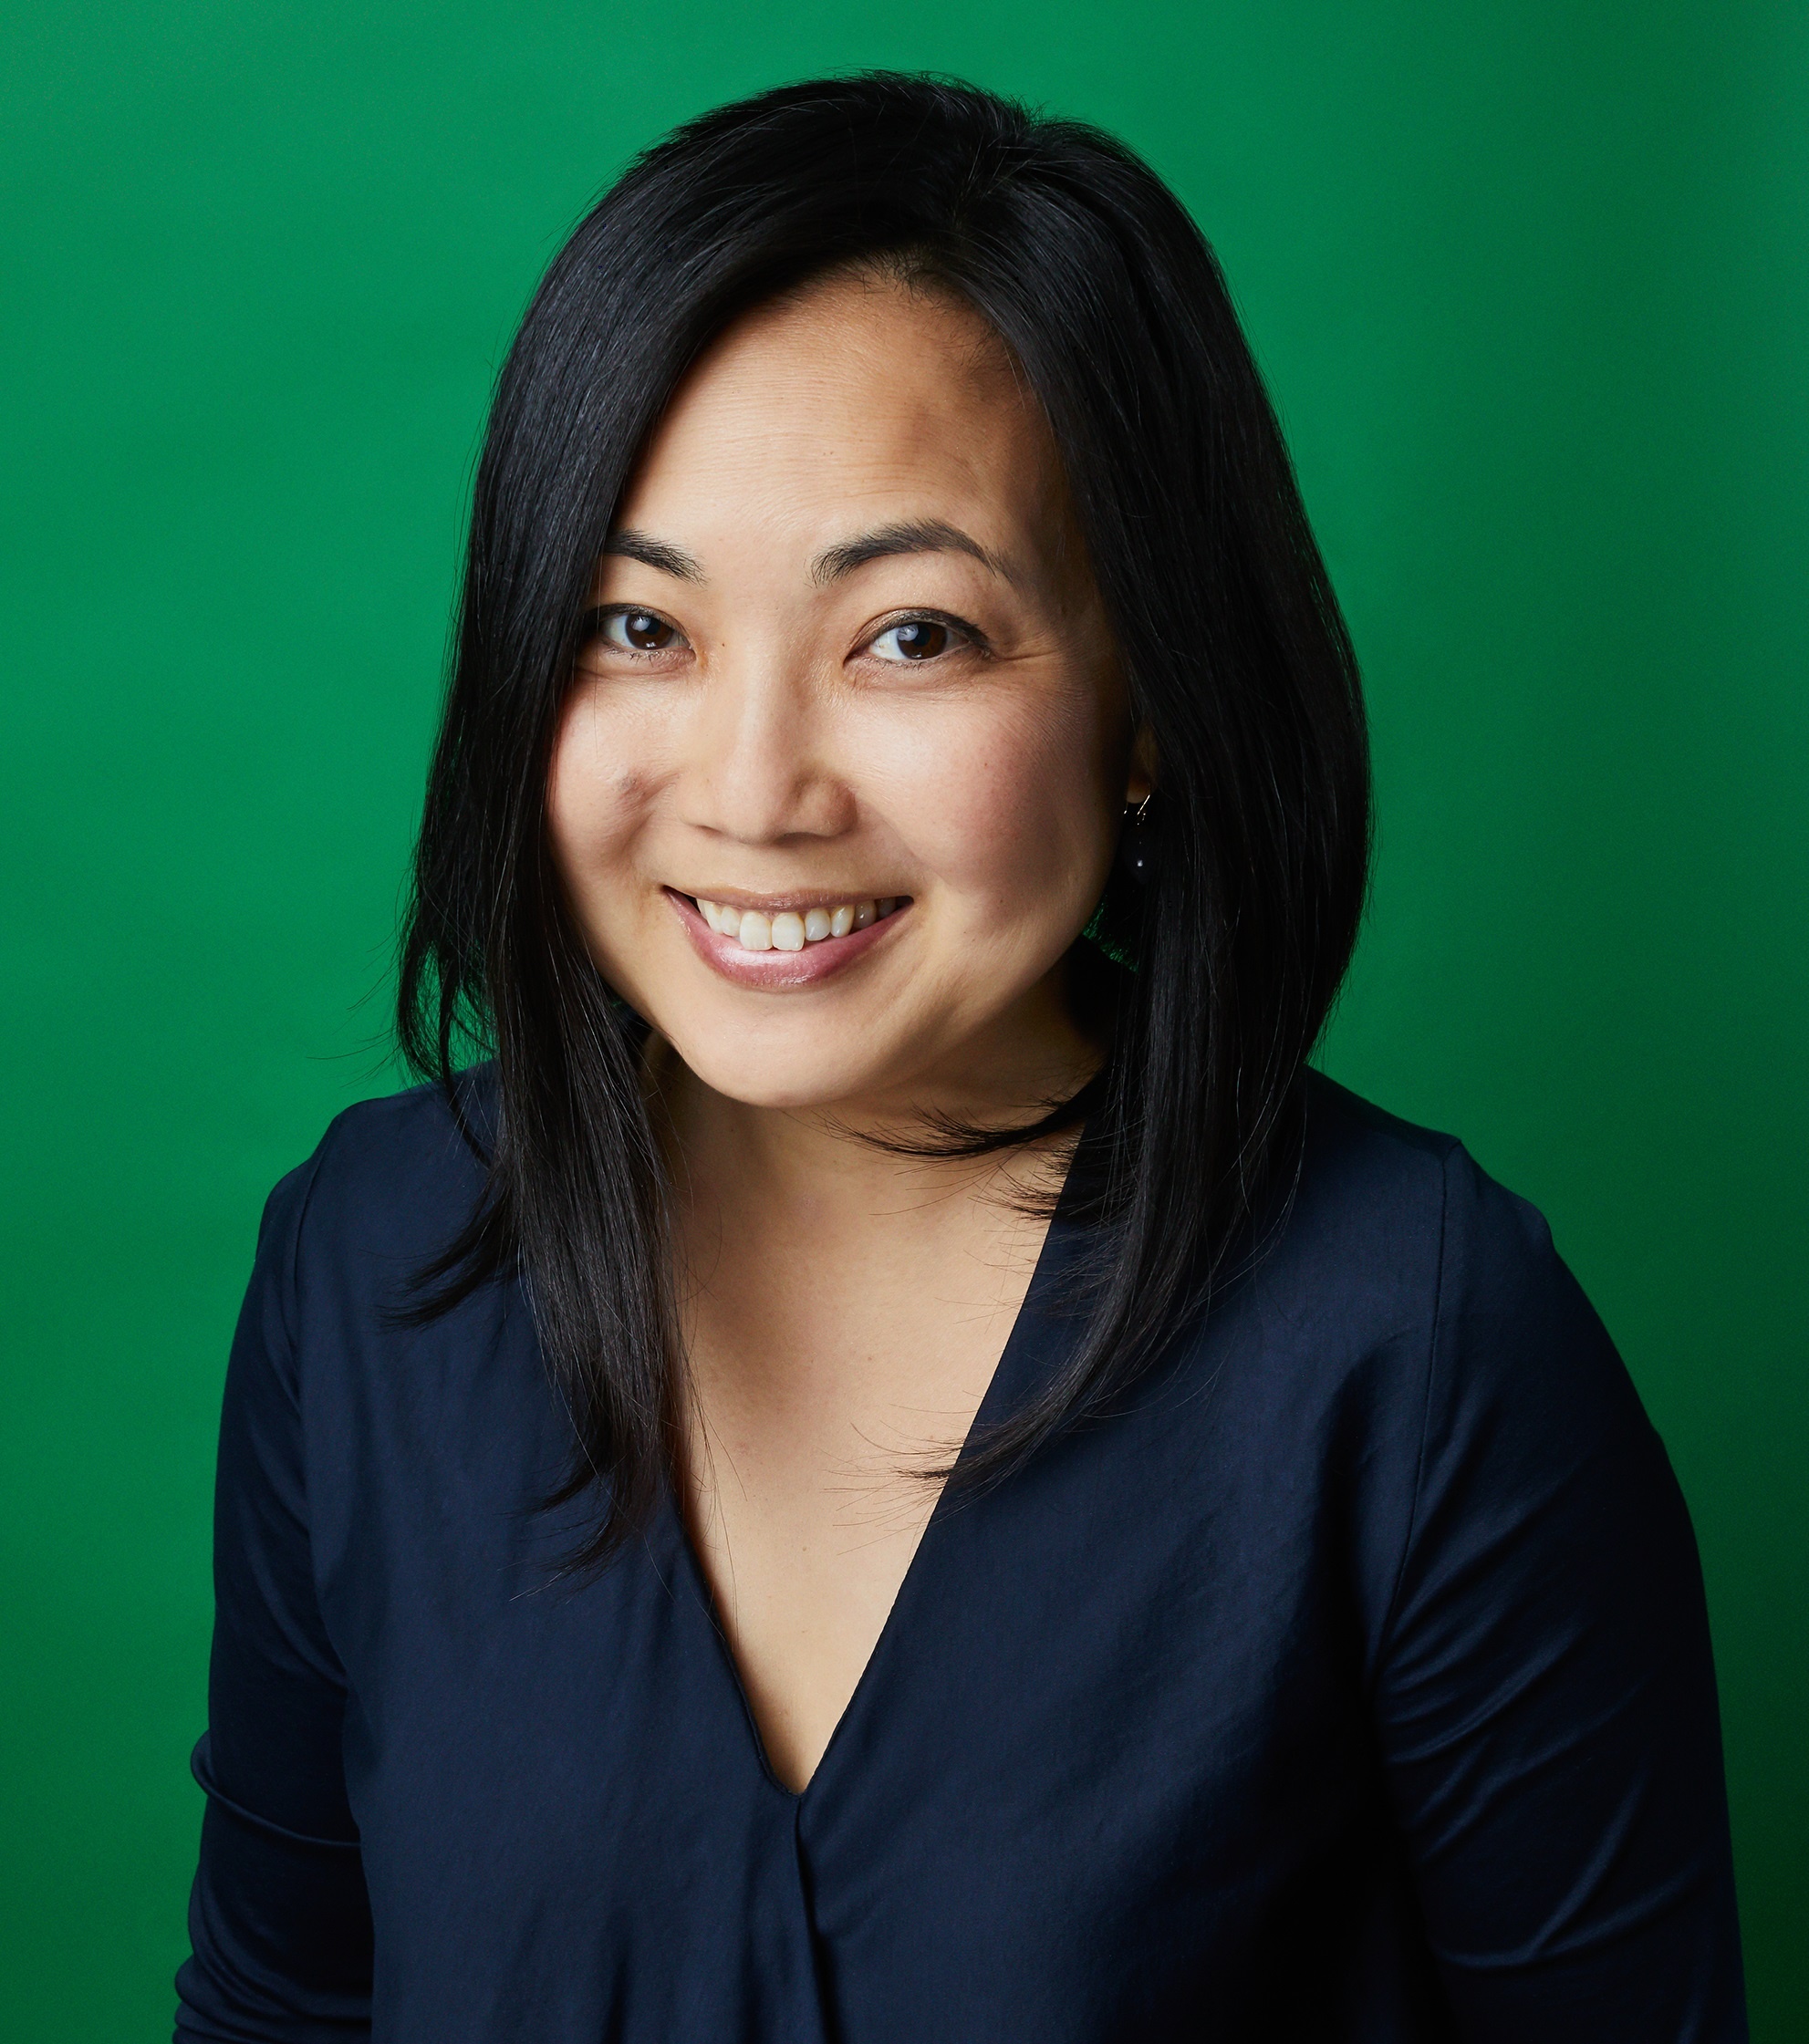 A portrait of Lisa Kim against an emerald background. Lisa has dark hair to her shoulders, wears a navy blue blouse, and smiles at us. 